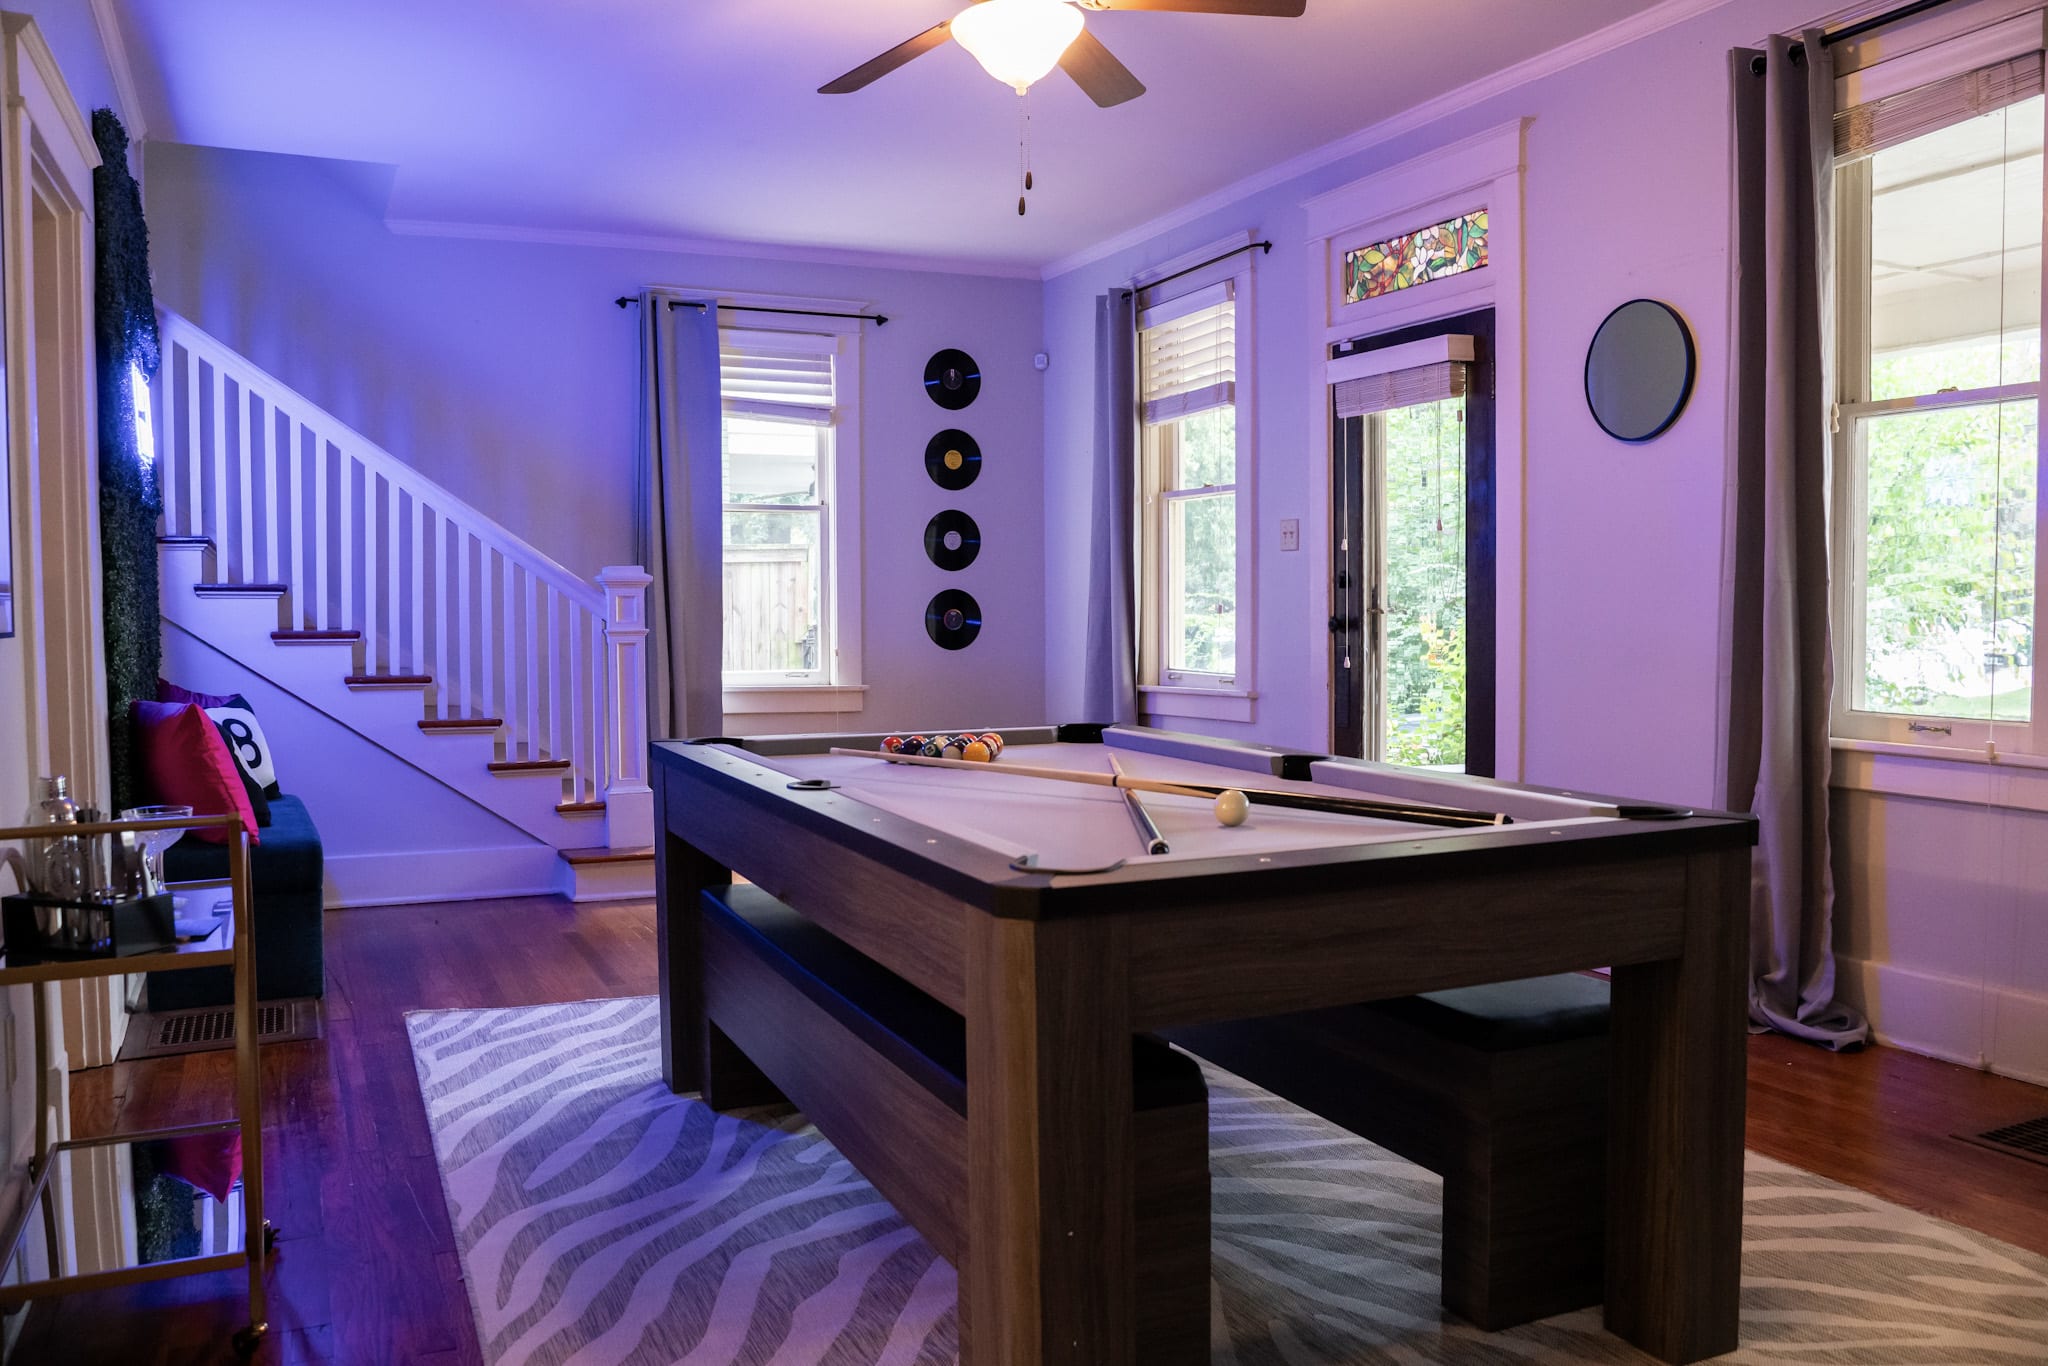 Play a game of pool at our brand new historic home in the heart of Memphis!